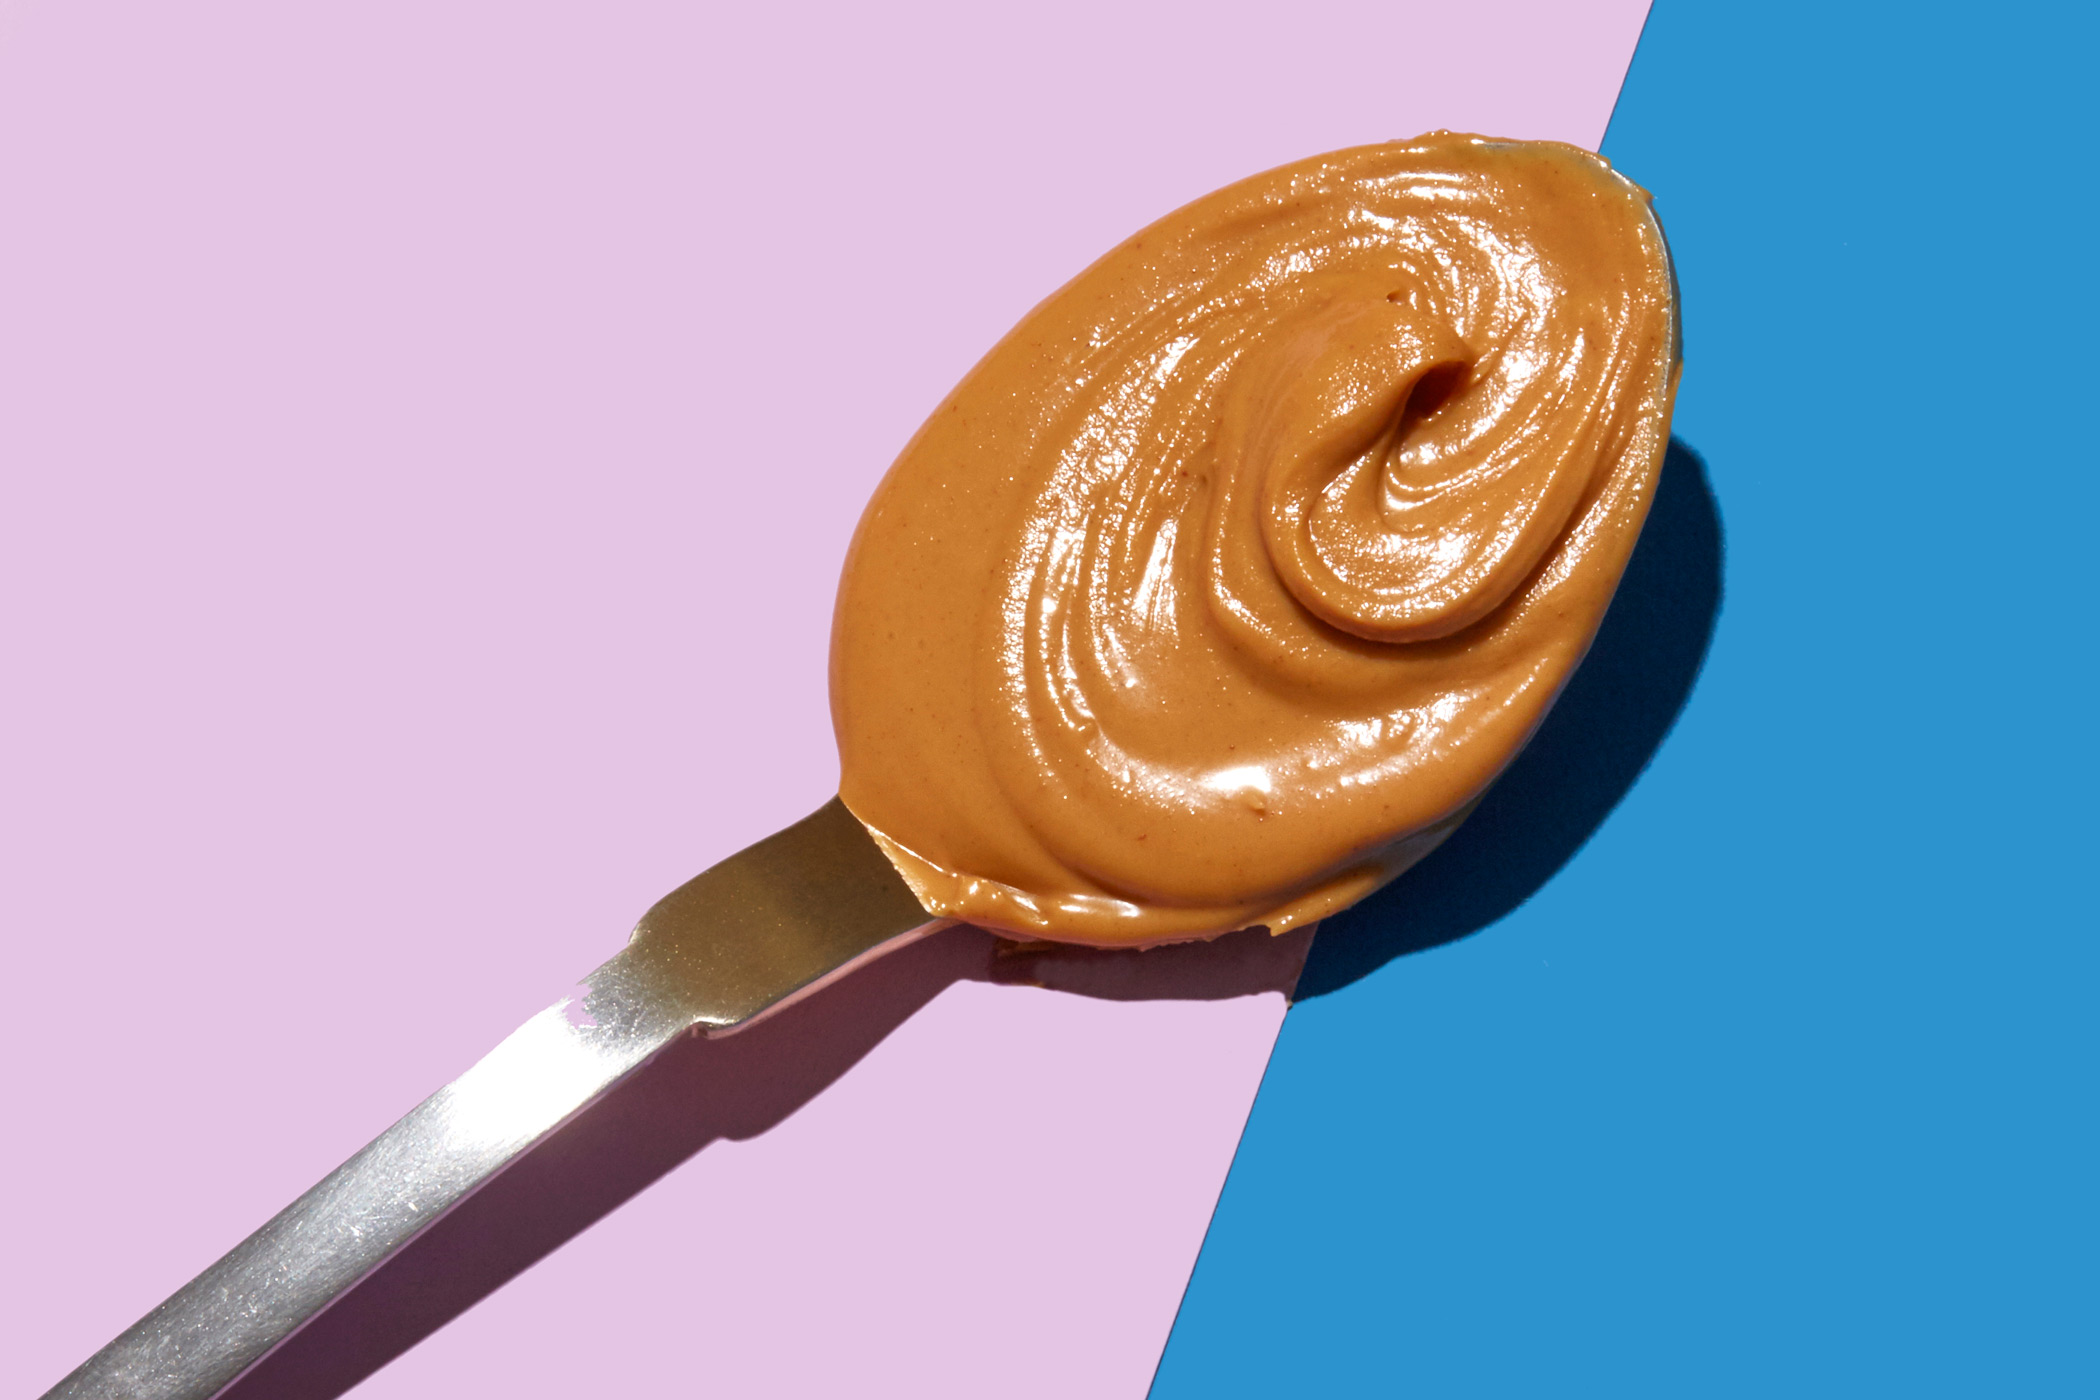 healthiest foods, health food, diet, nutrition, time.com stock, raw peanut butter